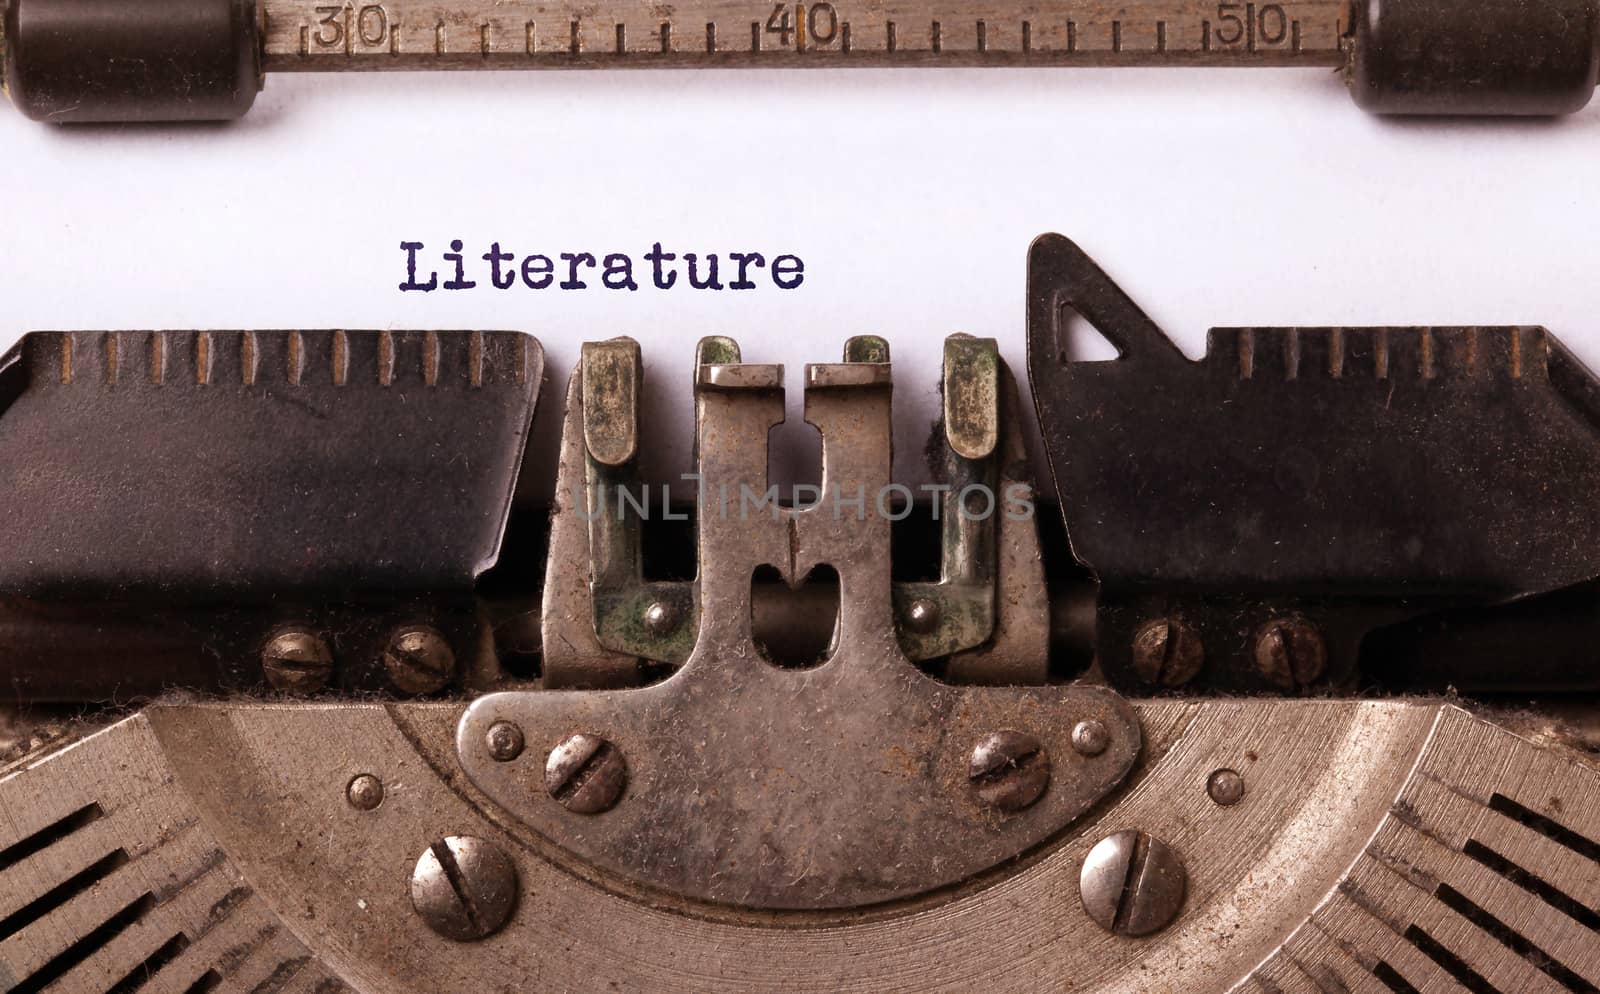 Vintage inscription made by old typewriter, Literature